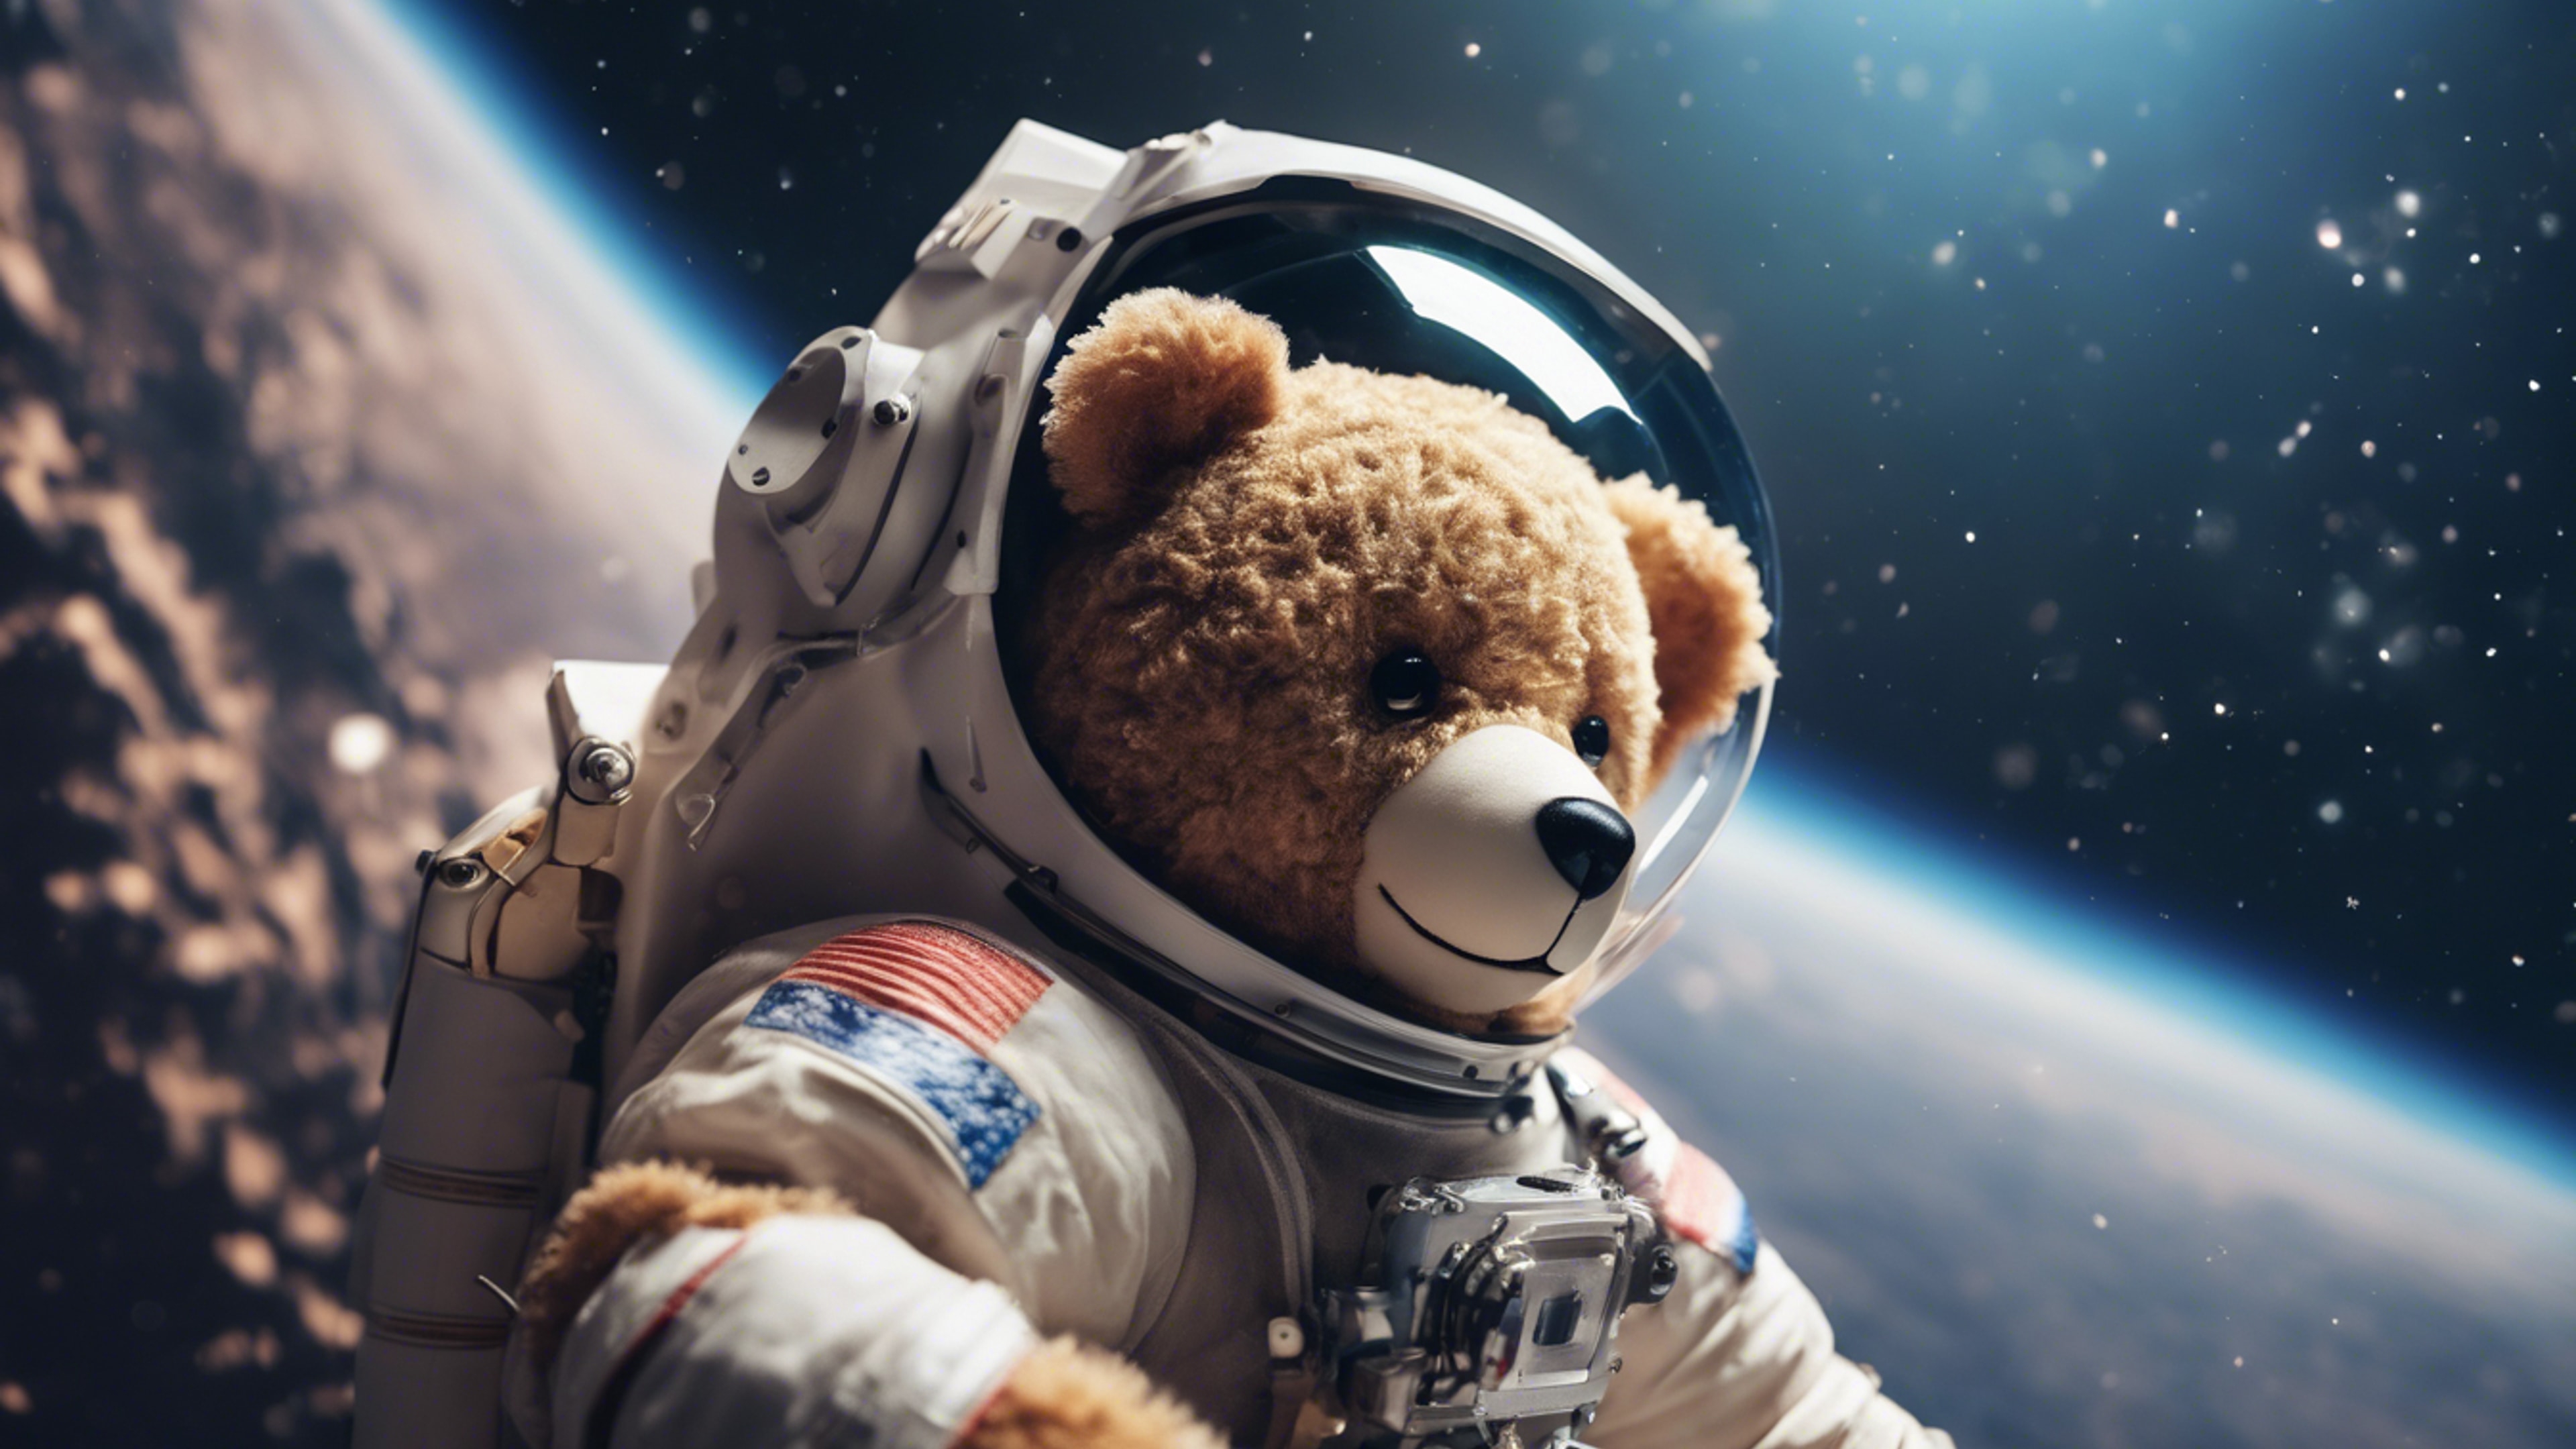 A teddy bear astronaut floating in space. Валлпапер[264e253f630141468c44]